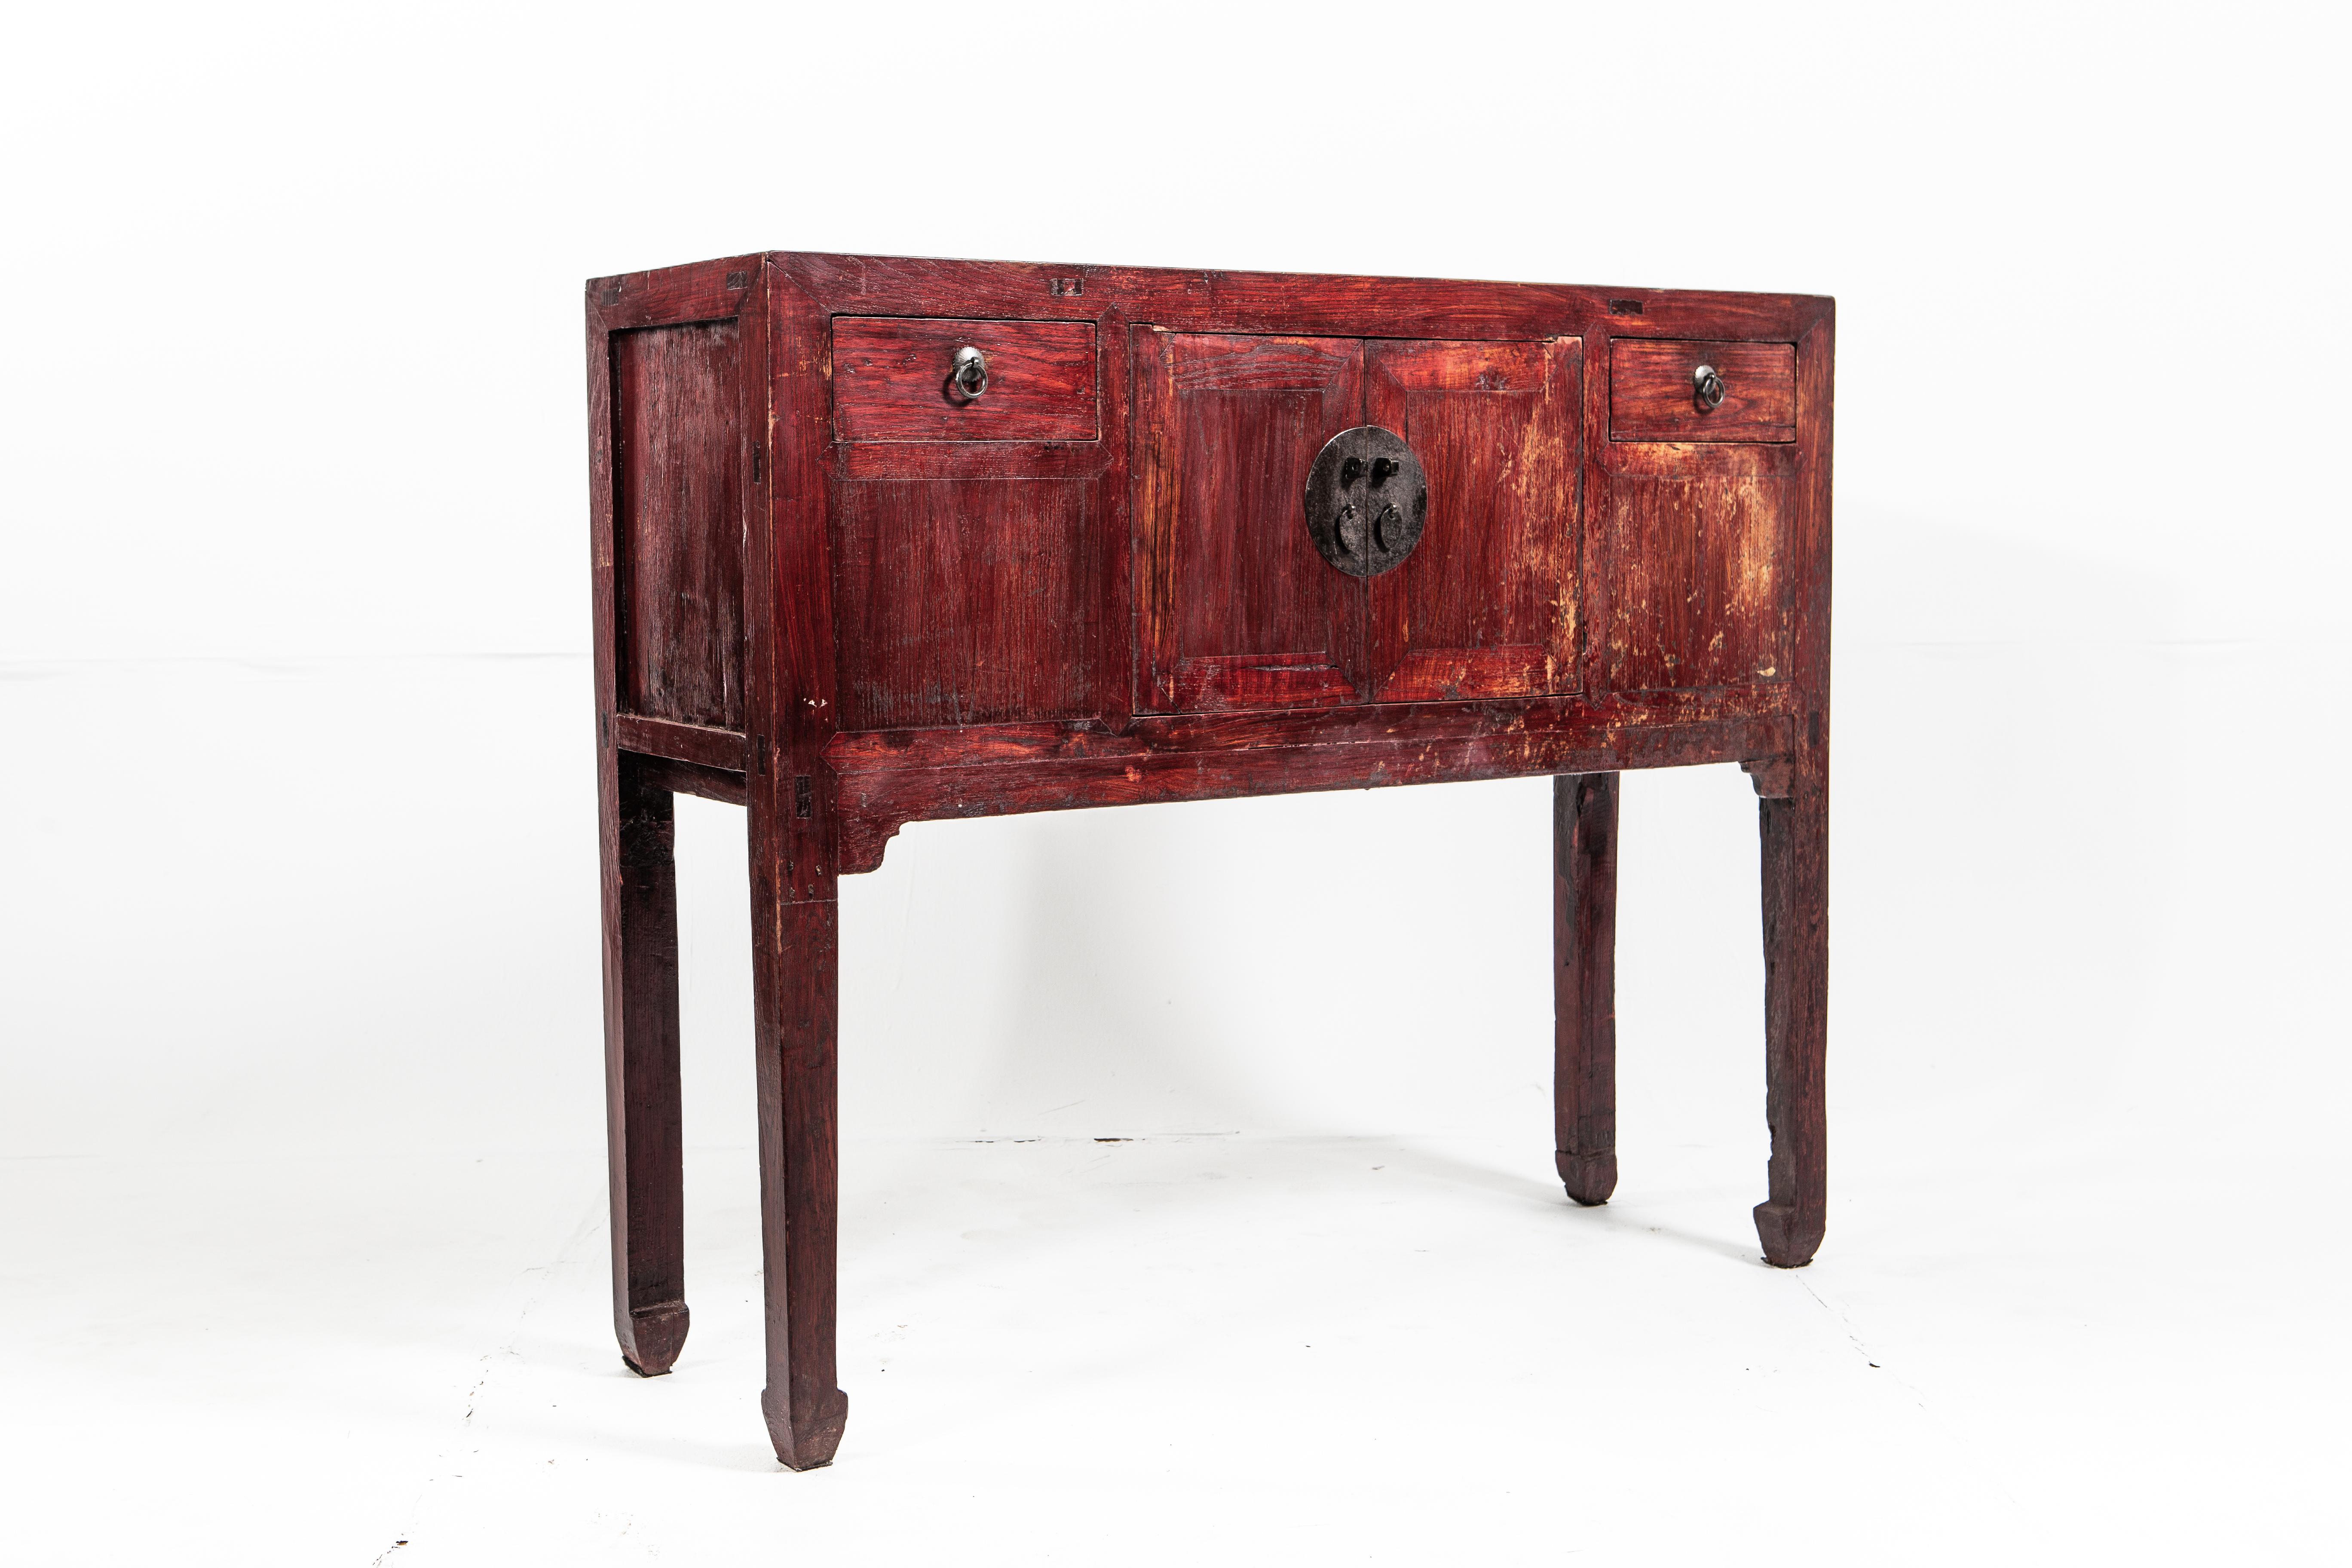 Late Qing Dynasty Console Chest (Chinesisch)